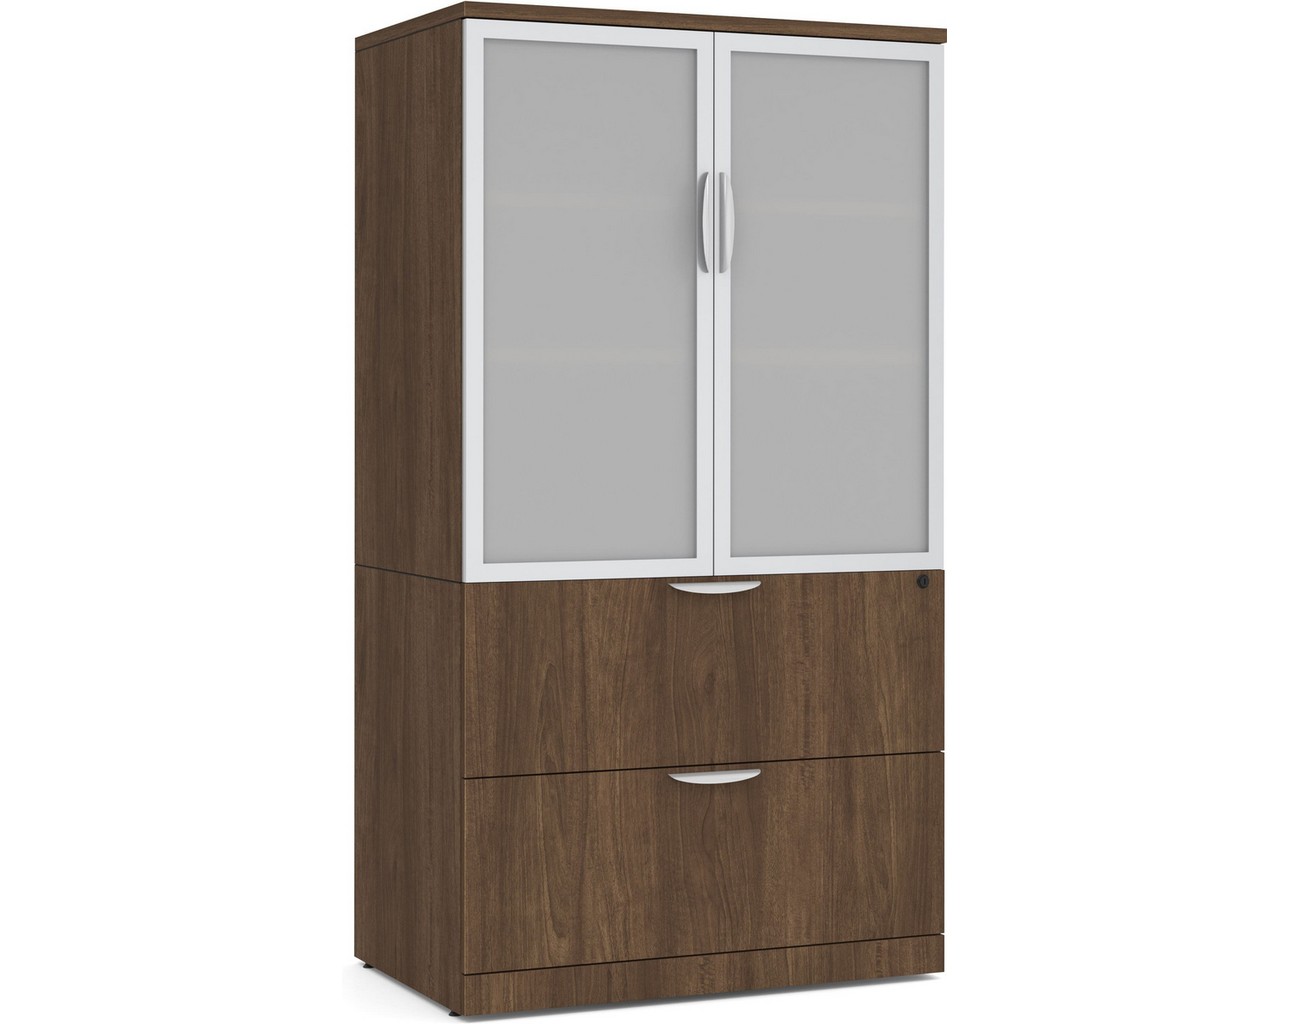 Locking Storage Cabinet and Lateral File Combo Unit with Glass Doors - Modern Walnut